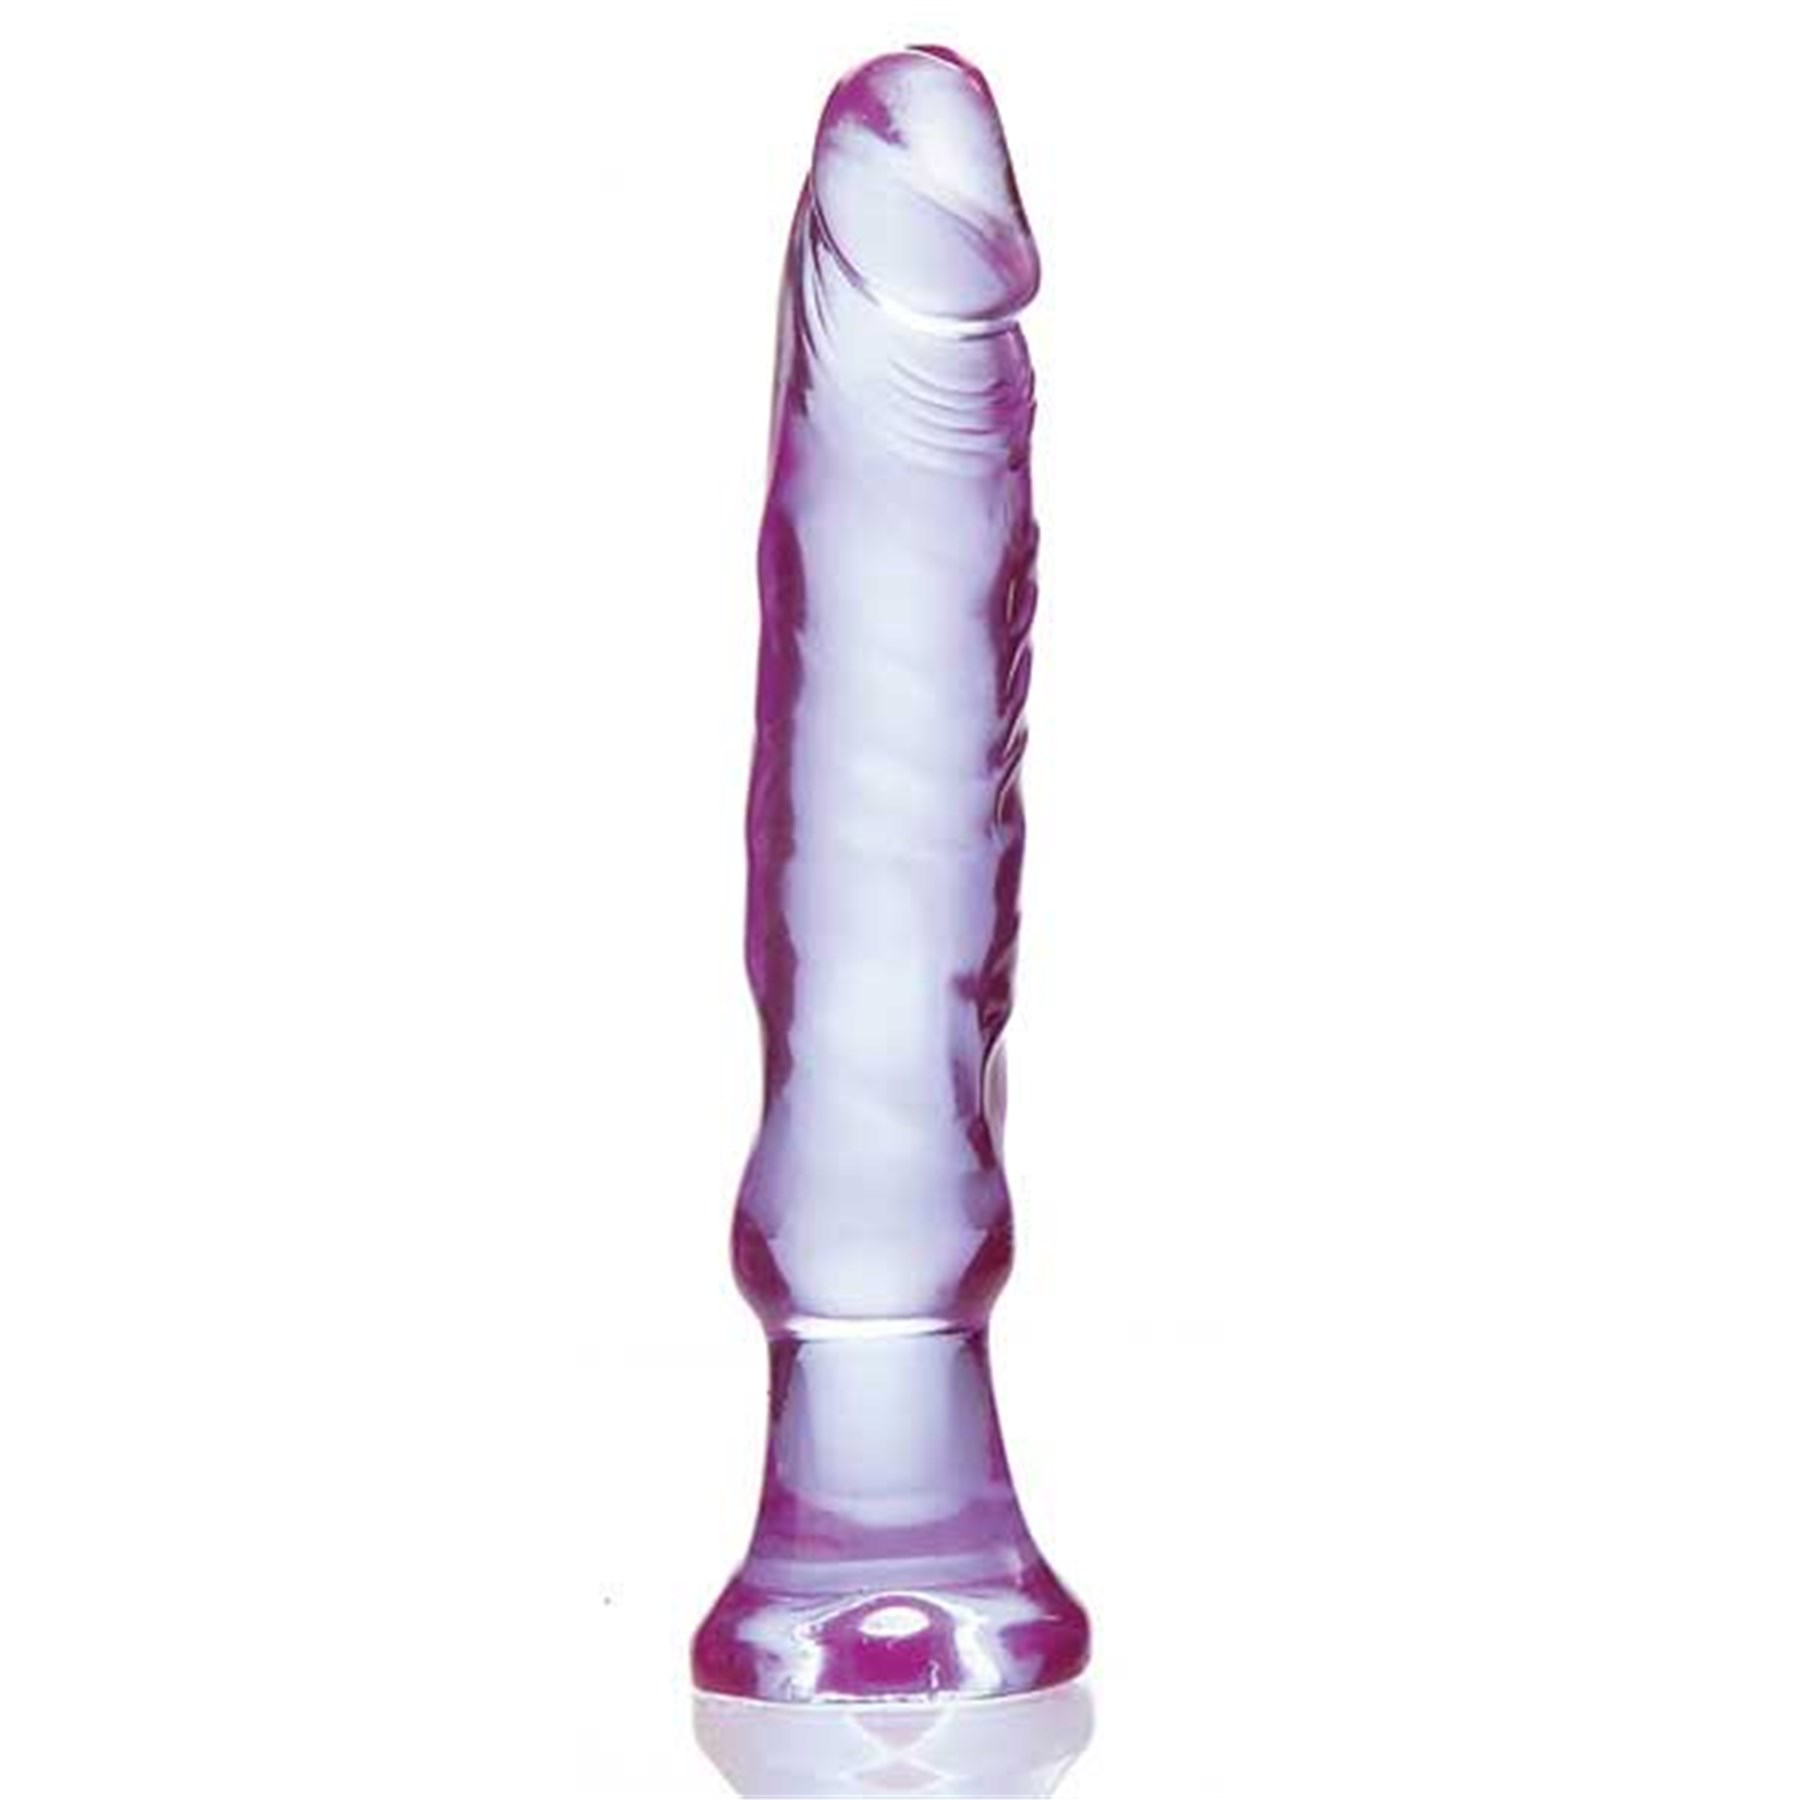 Anal Dildos Male Vibrator in 